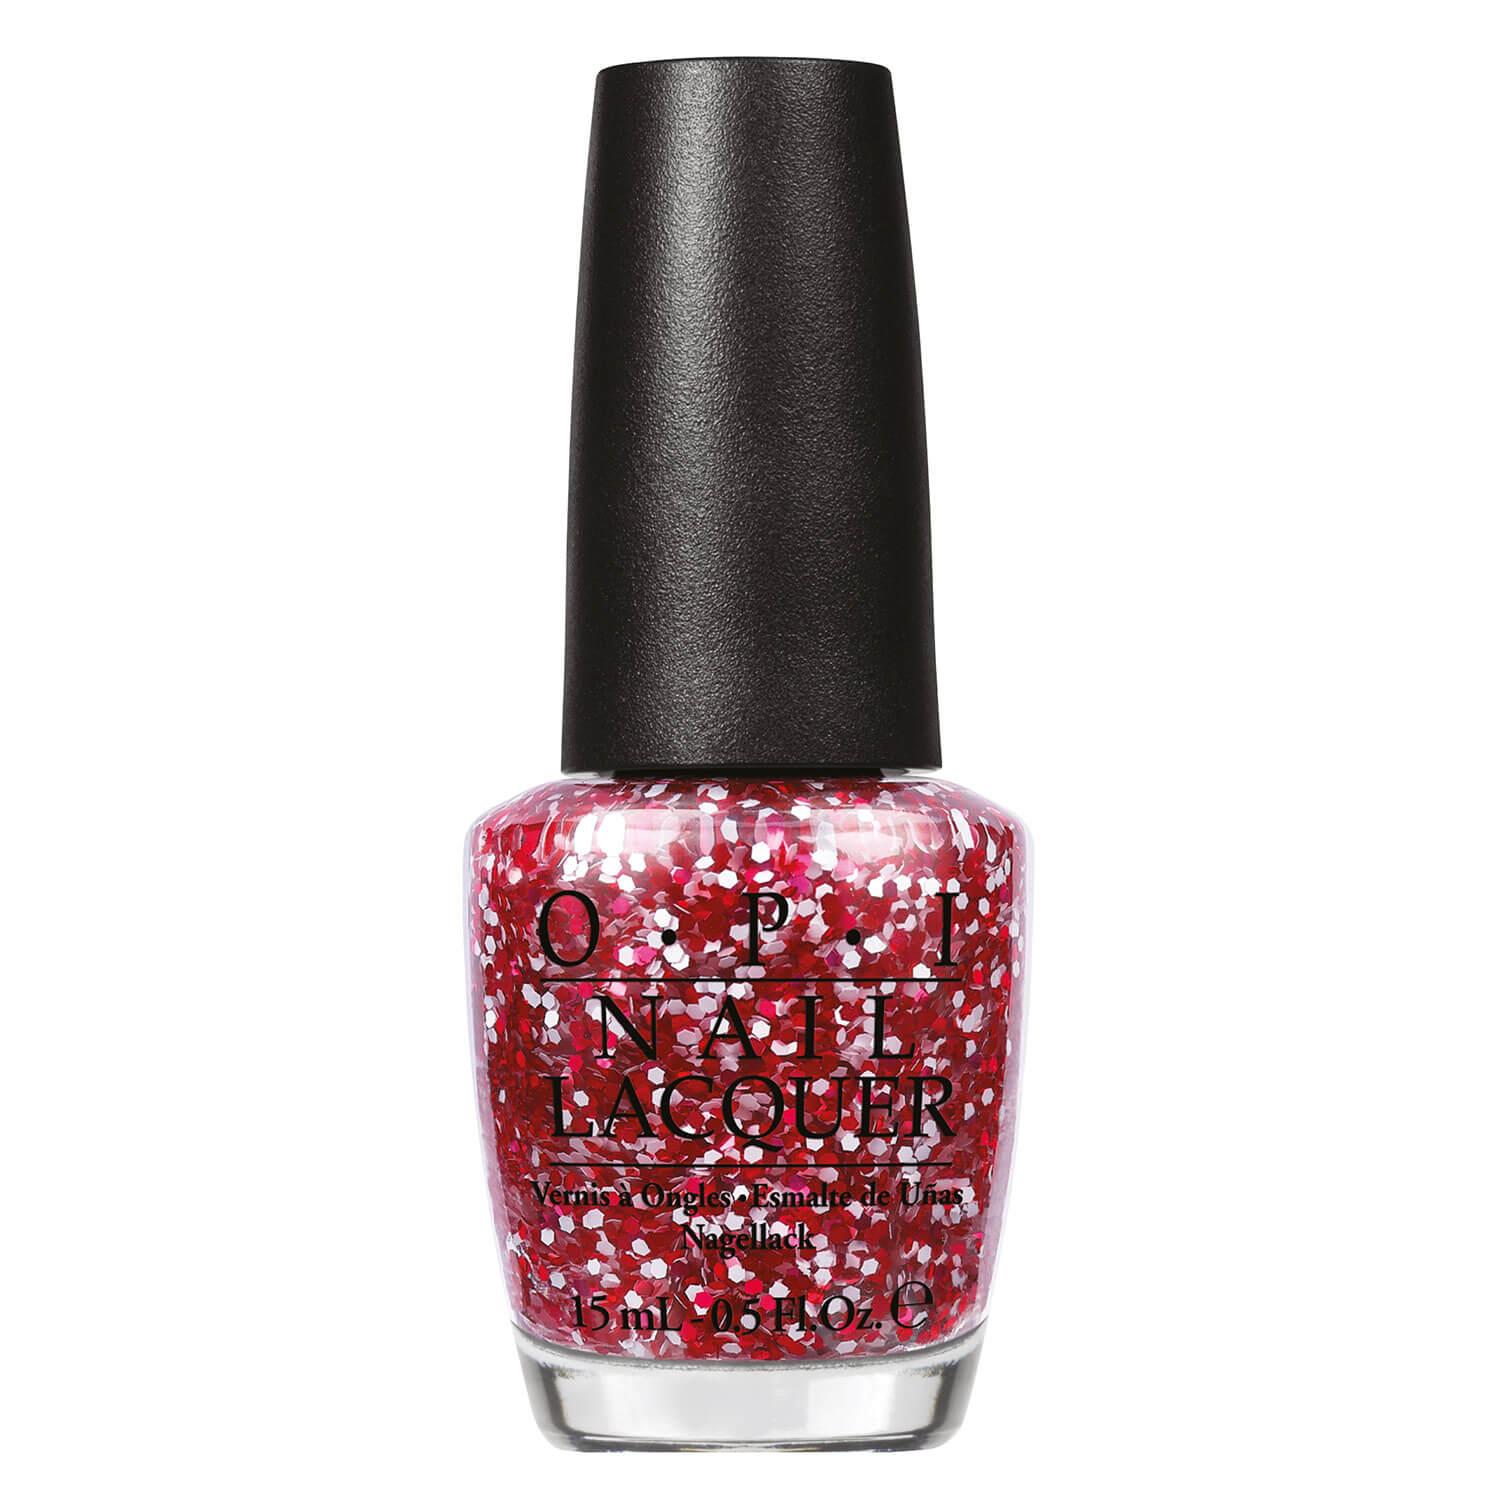 Glitter by OPI - Blush Hour